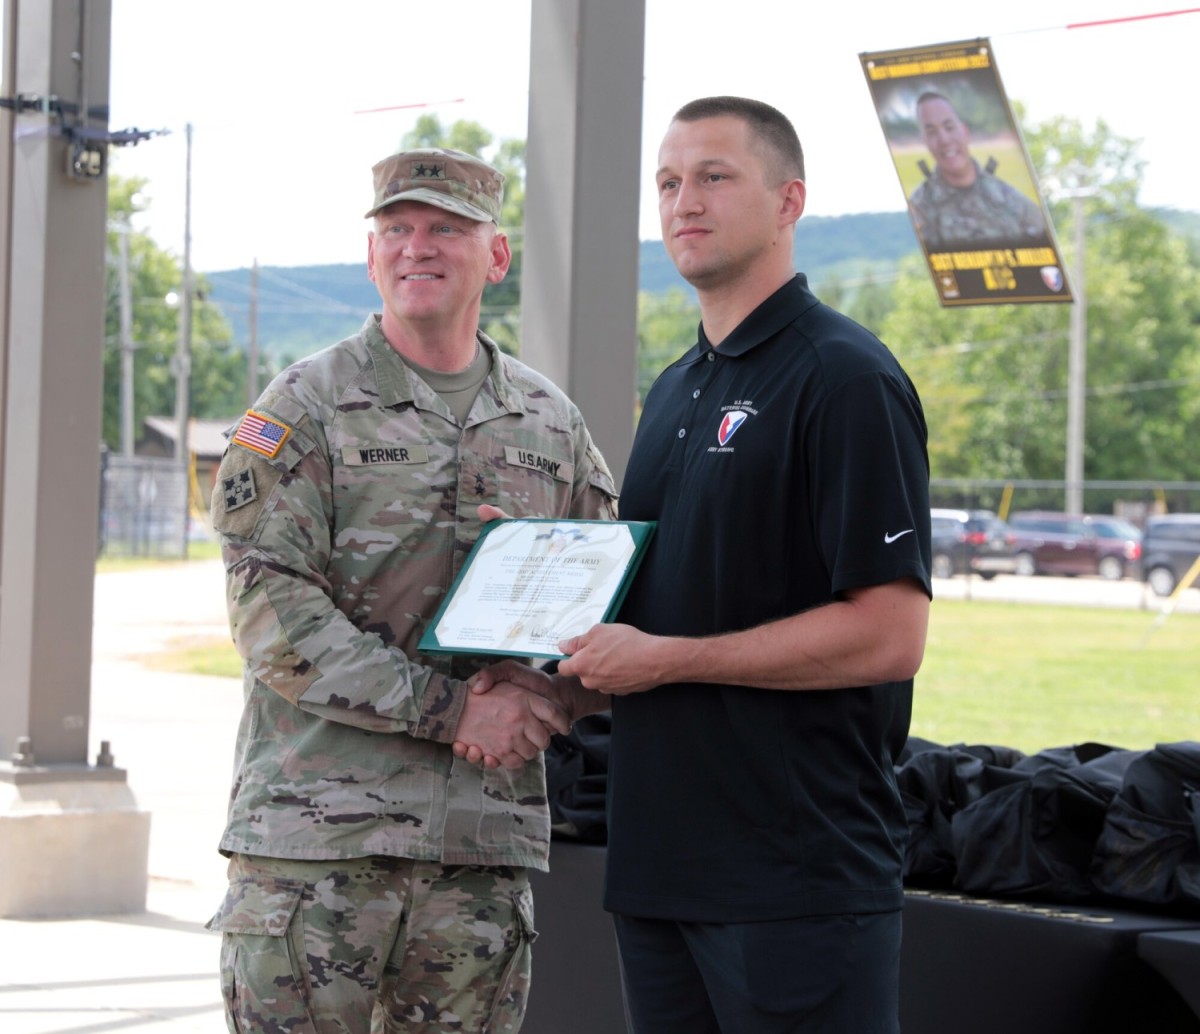   
																Soldier attributes success to Family, camaraderie 
															 